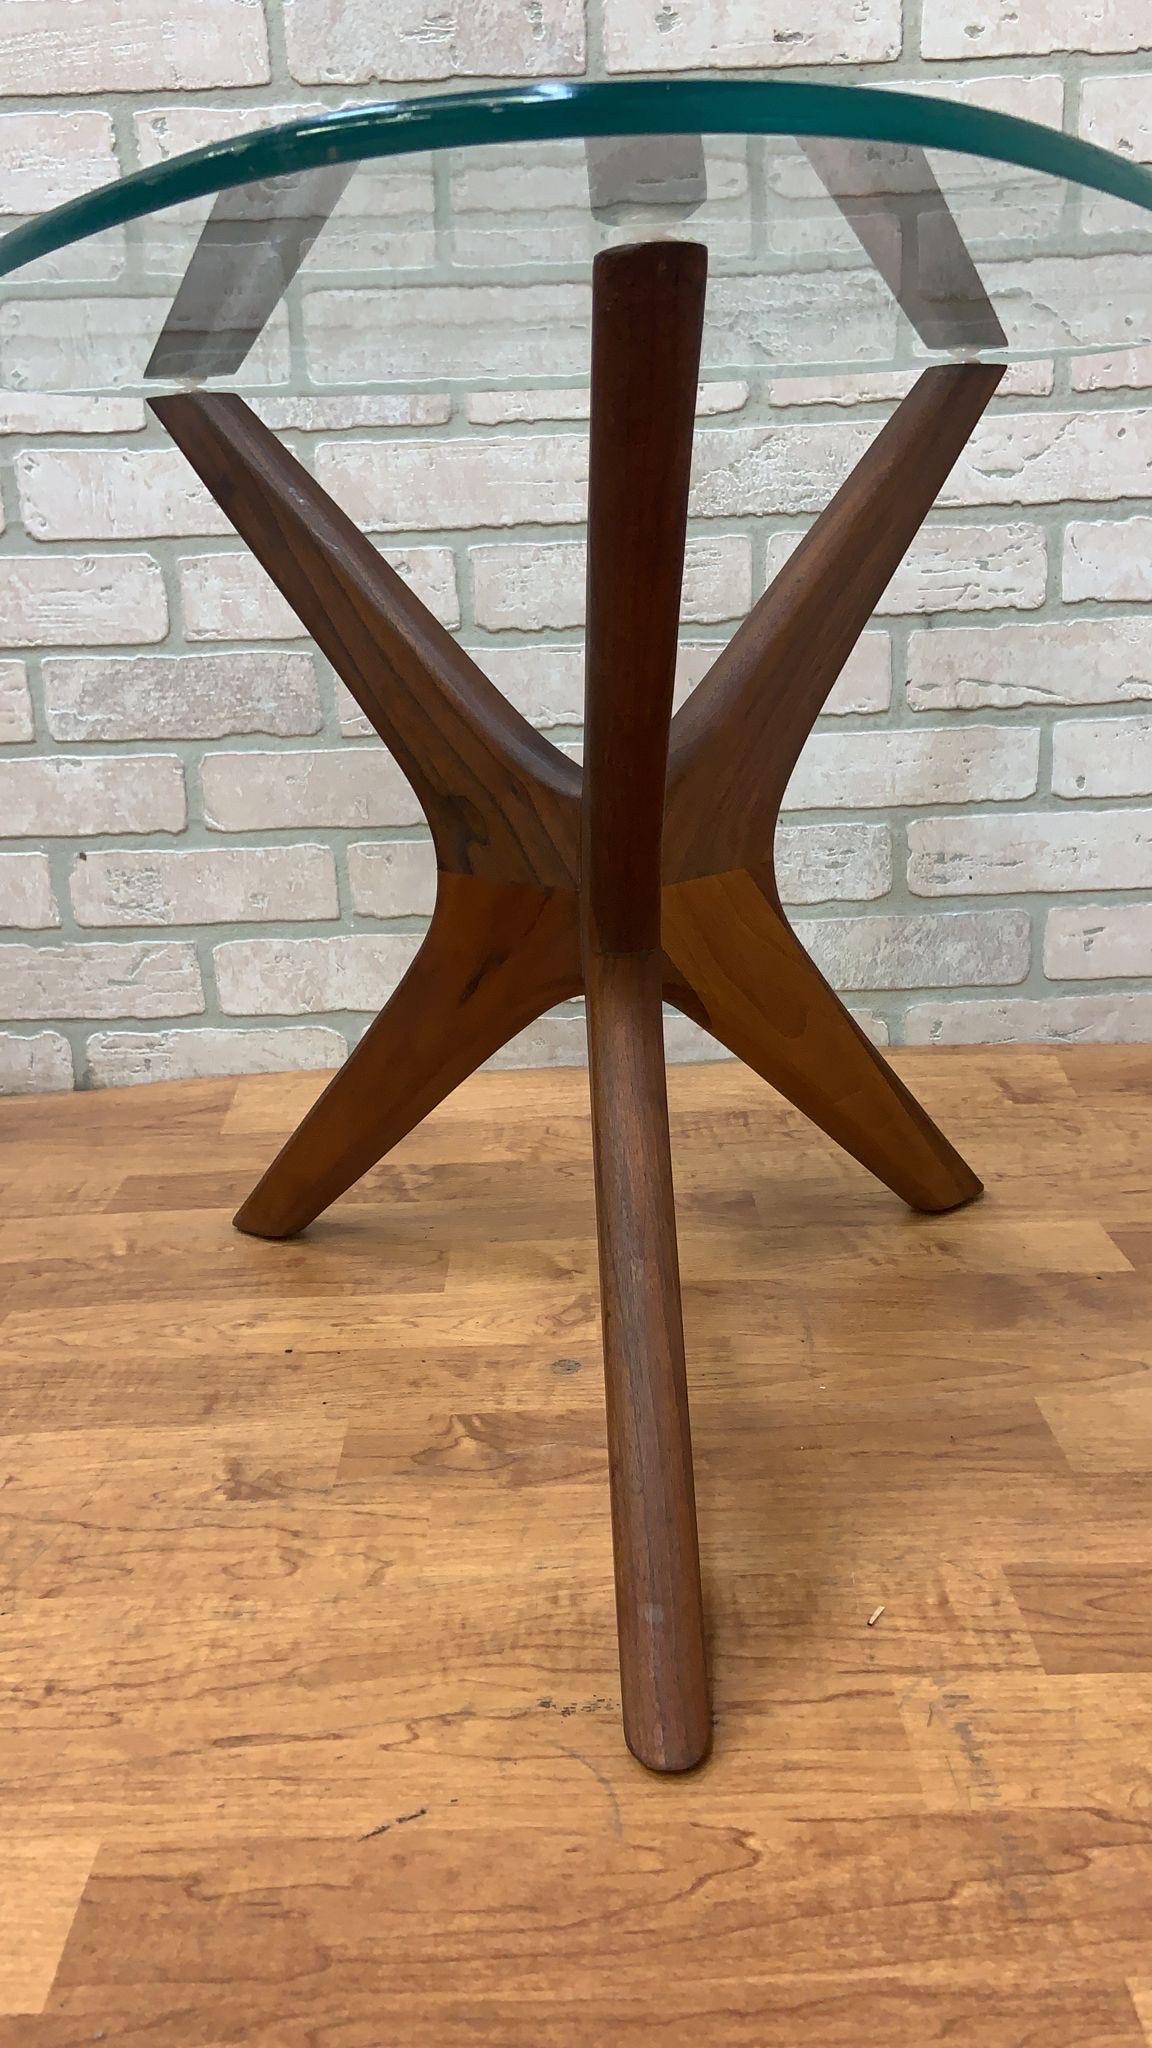 American Mid Century Modern Adrian Pearsall Jacks Side Table For Sale